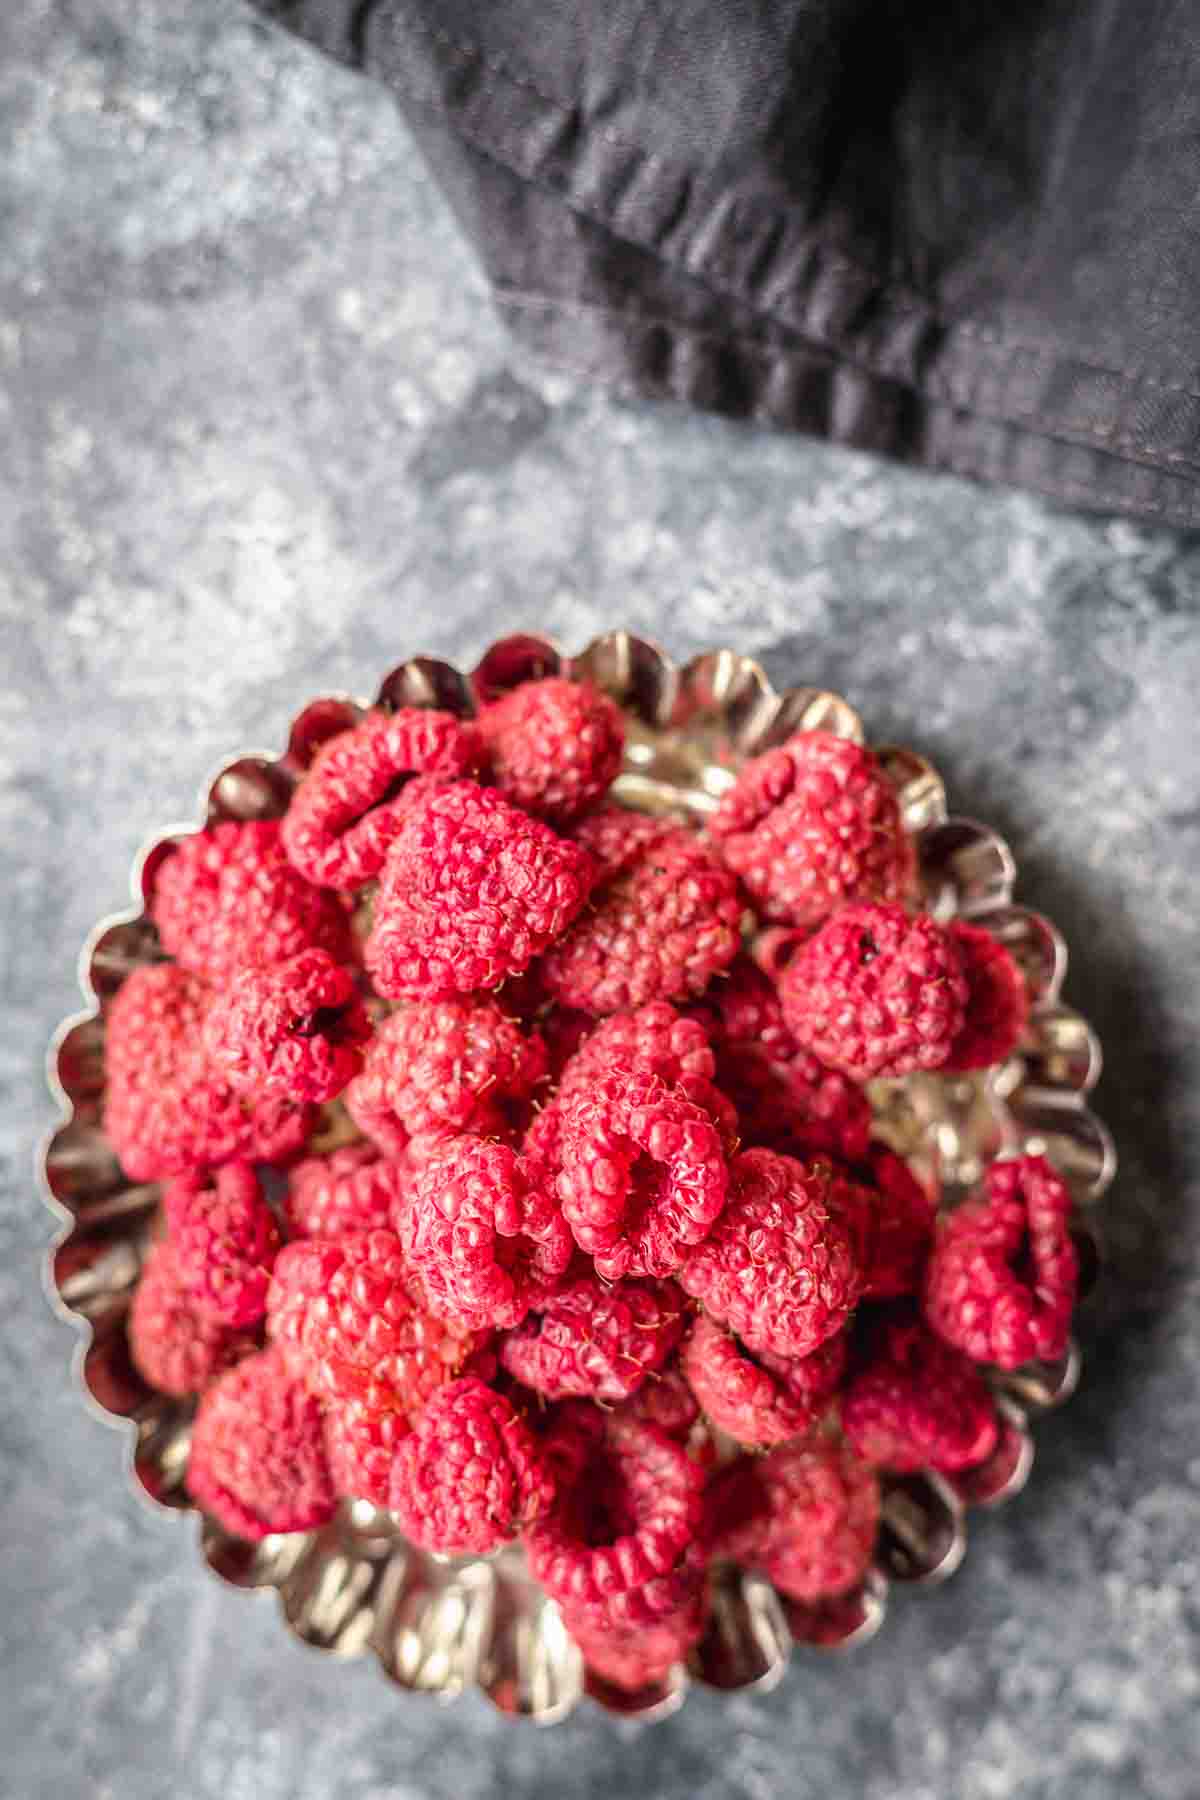 How To Dehydrate Raspberries in a bowl.